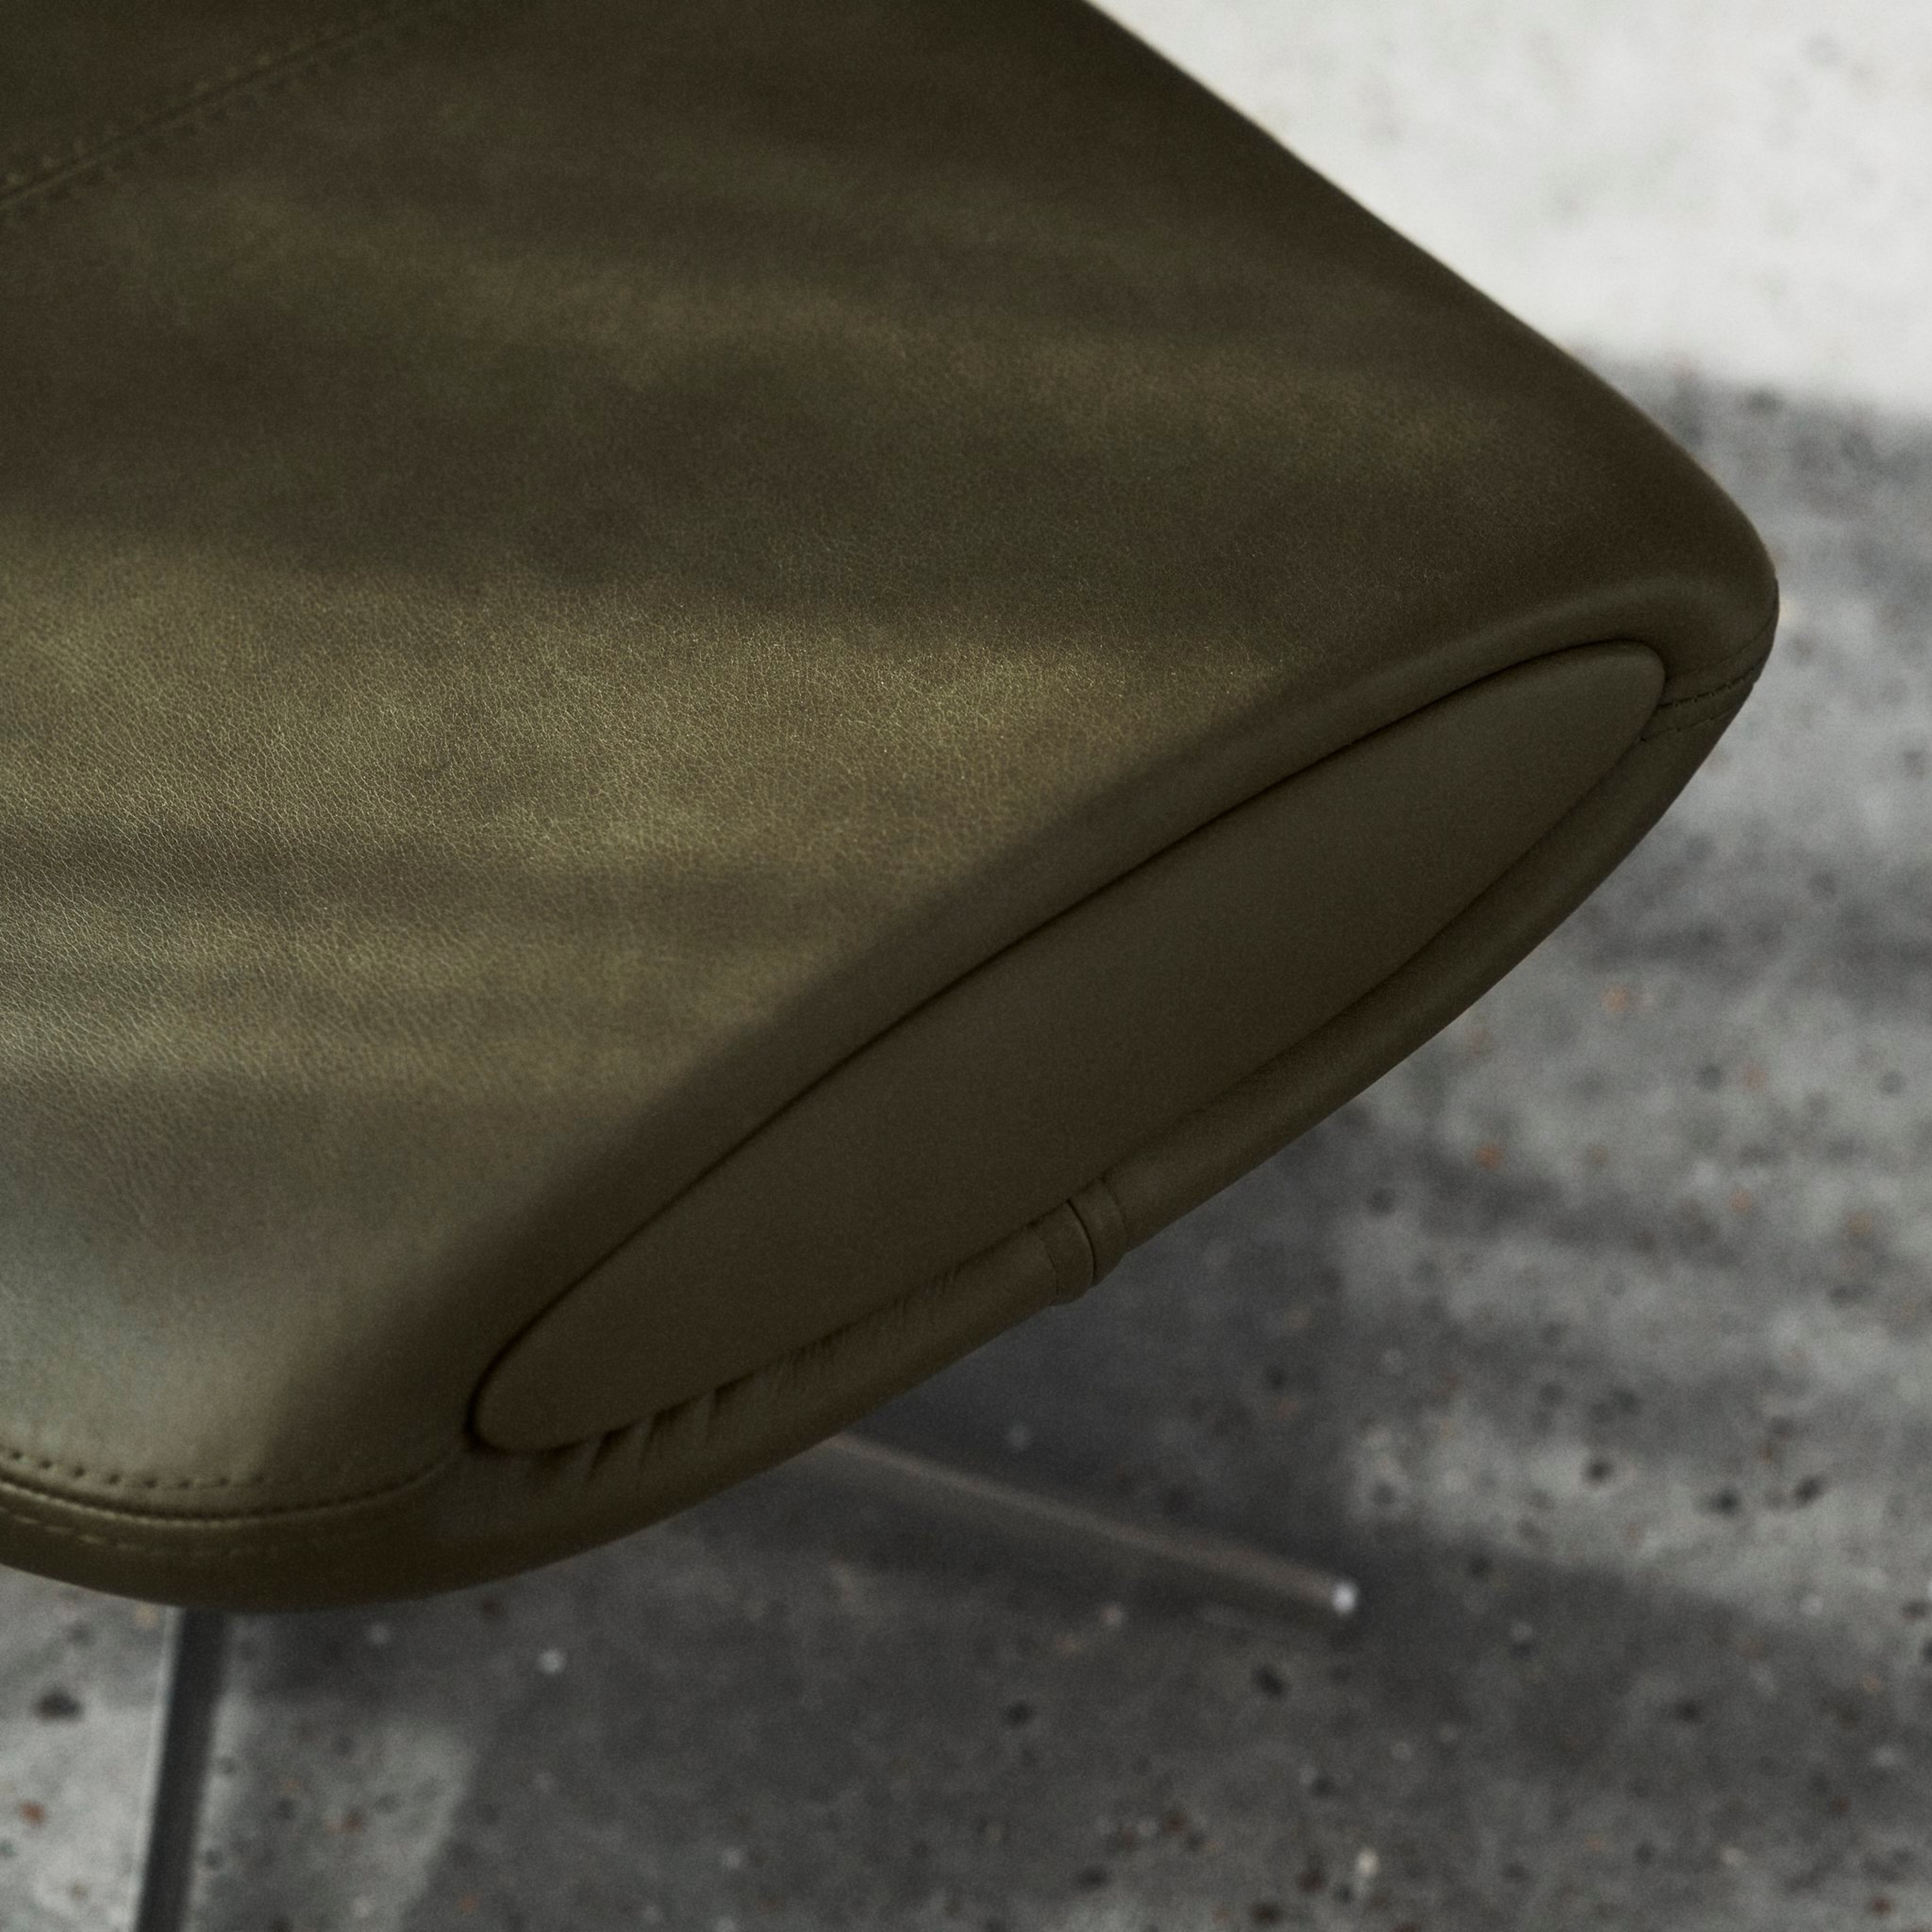 Close-up of olive green chair's edge with stitching details on a concrete floor.